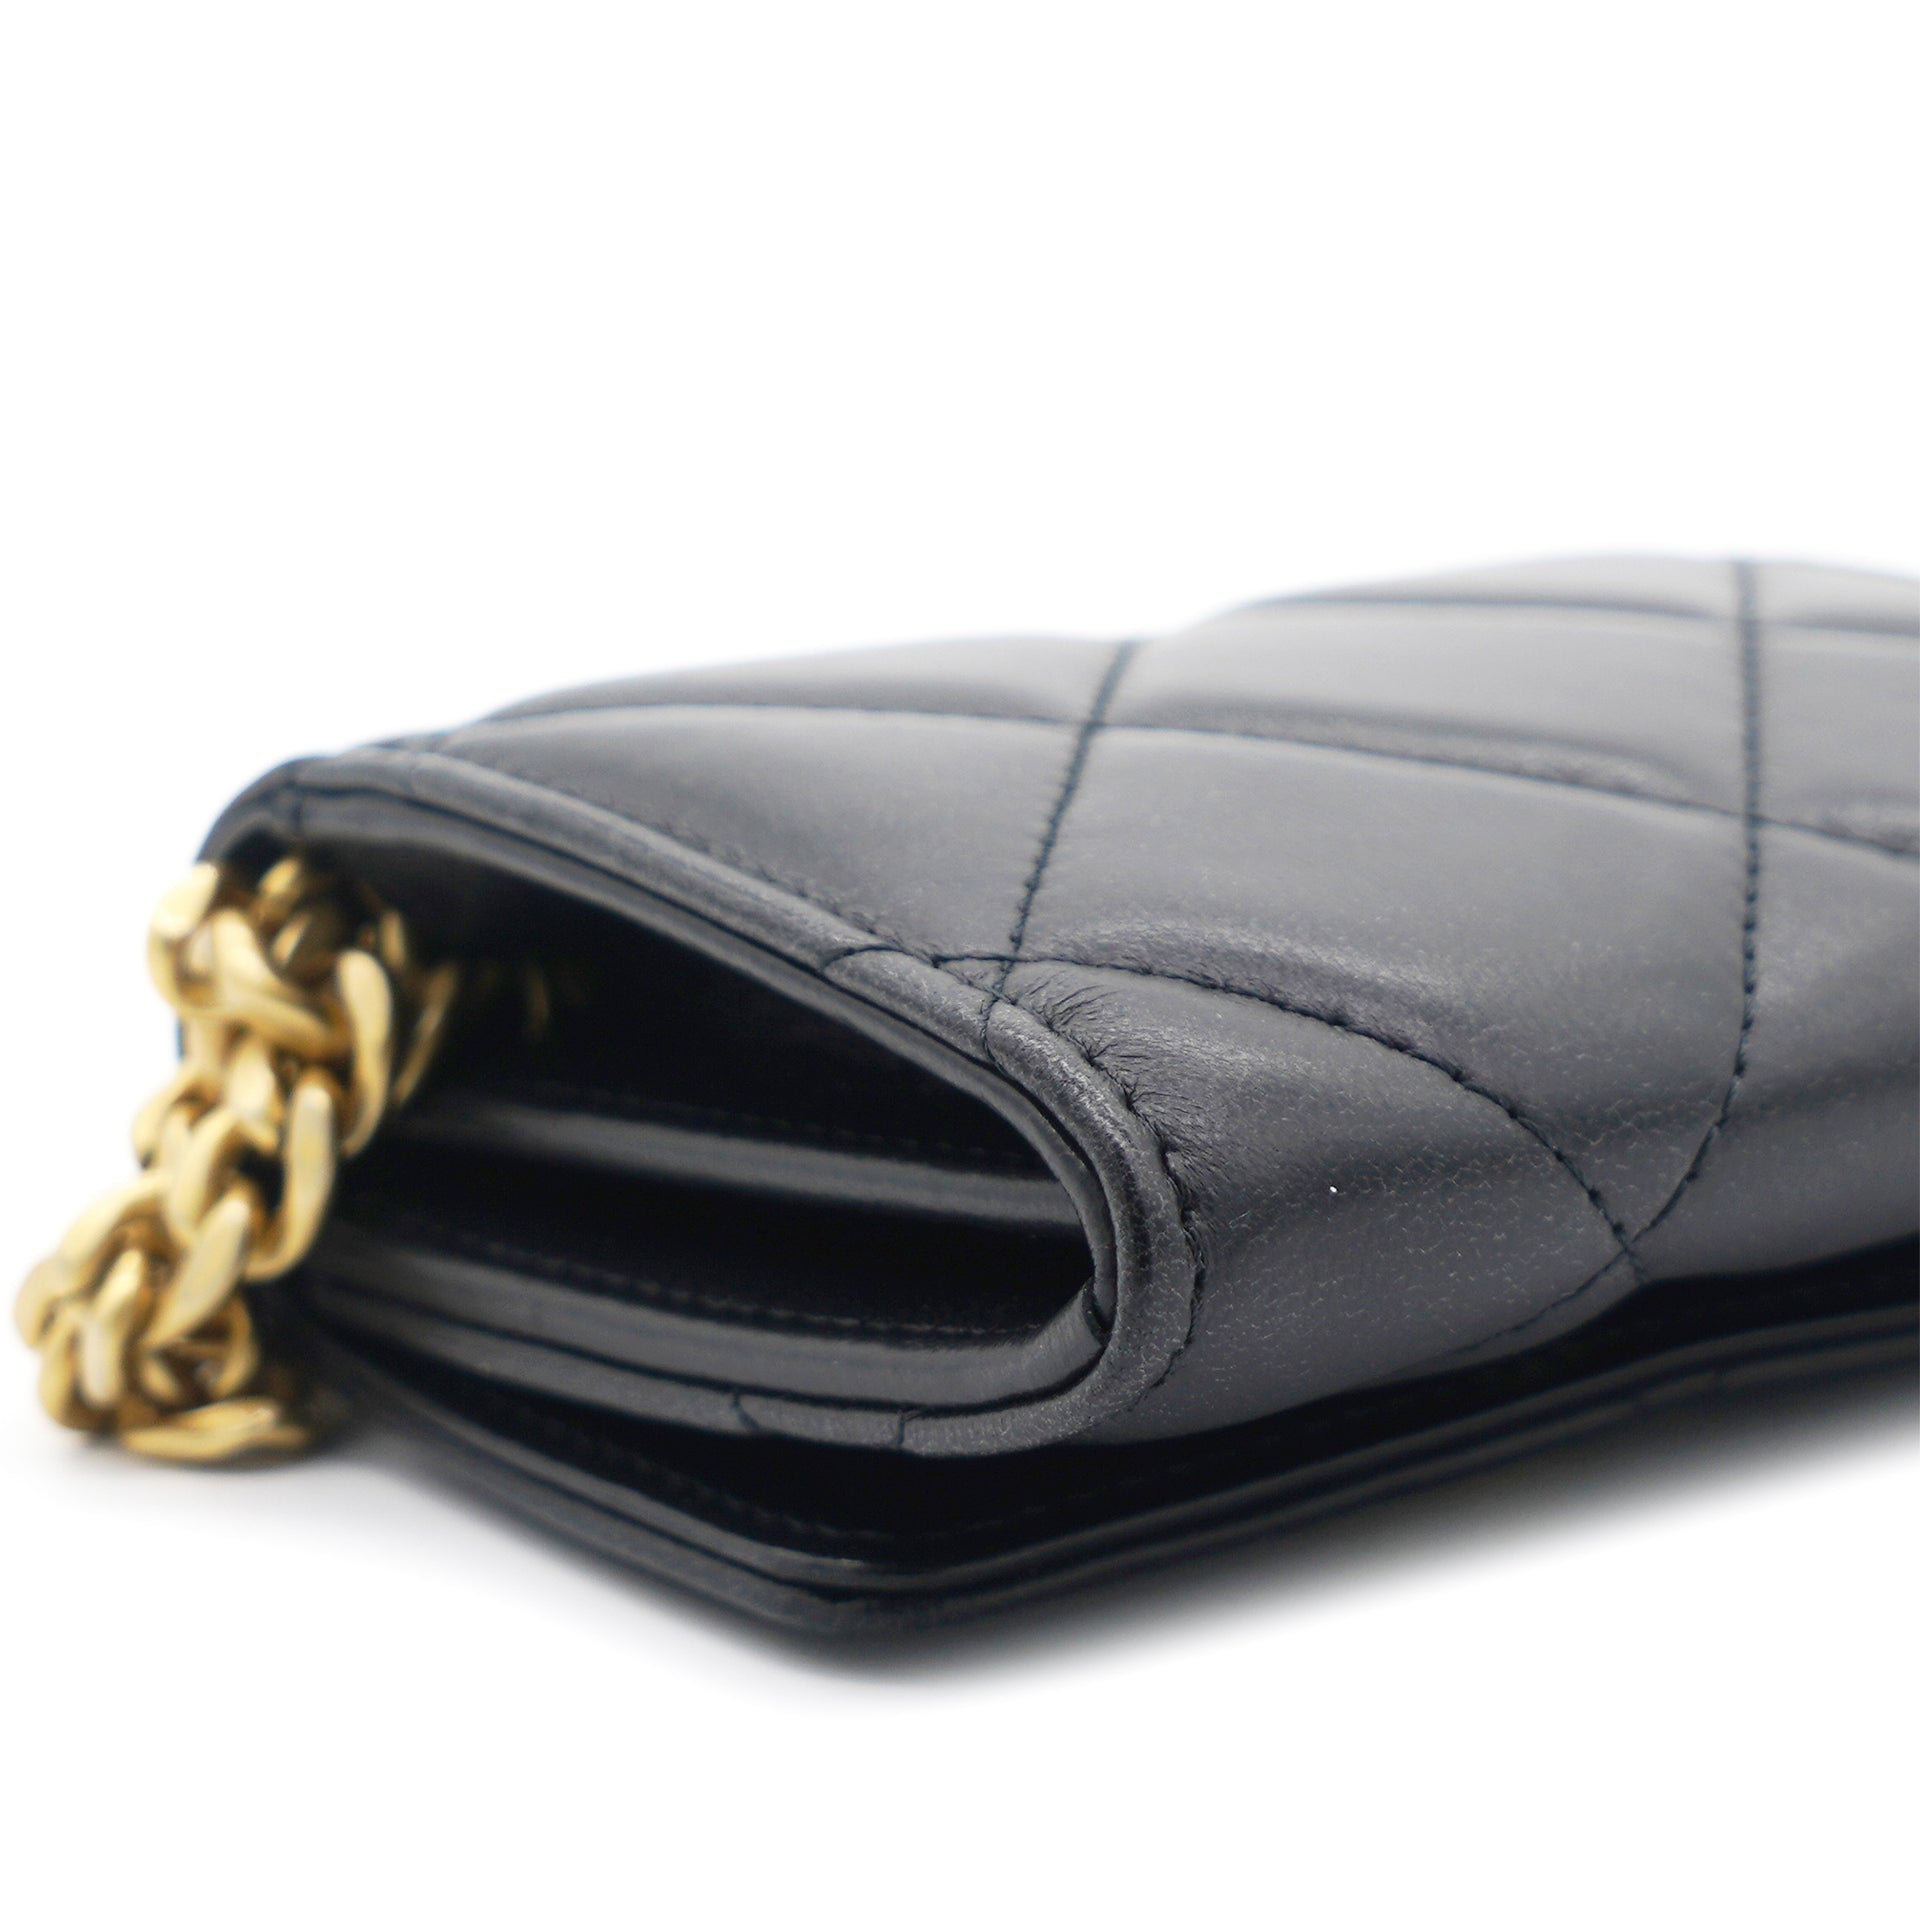 Chanel Black Quilted Lambskin Leather cc Enamel Card Holder with